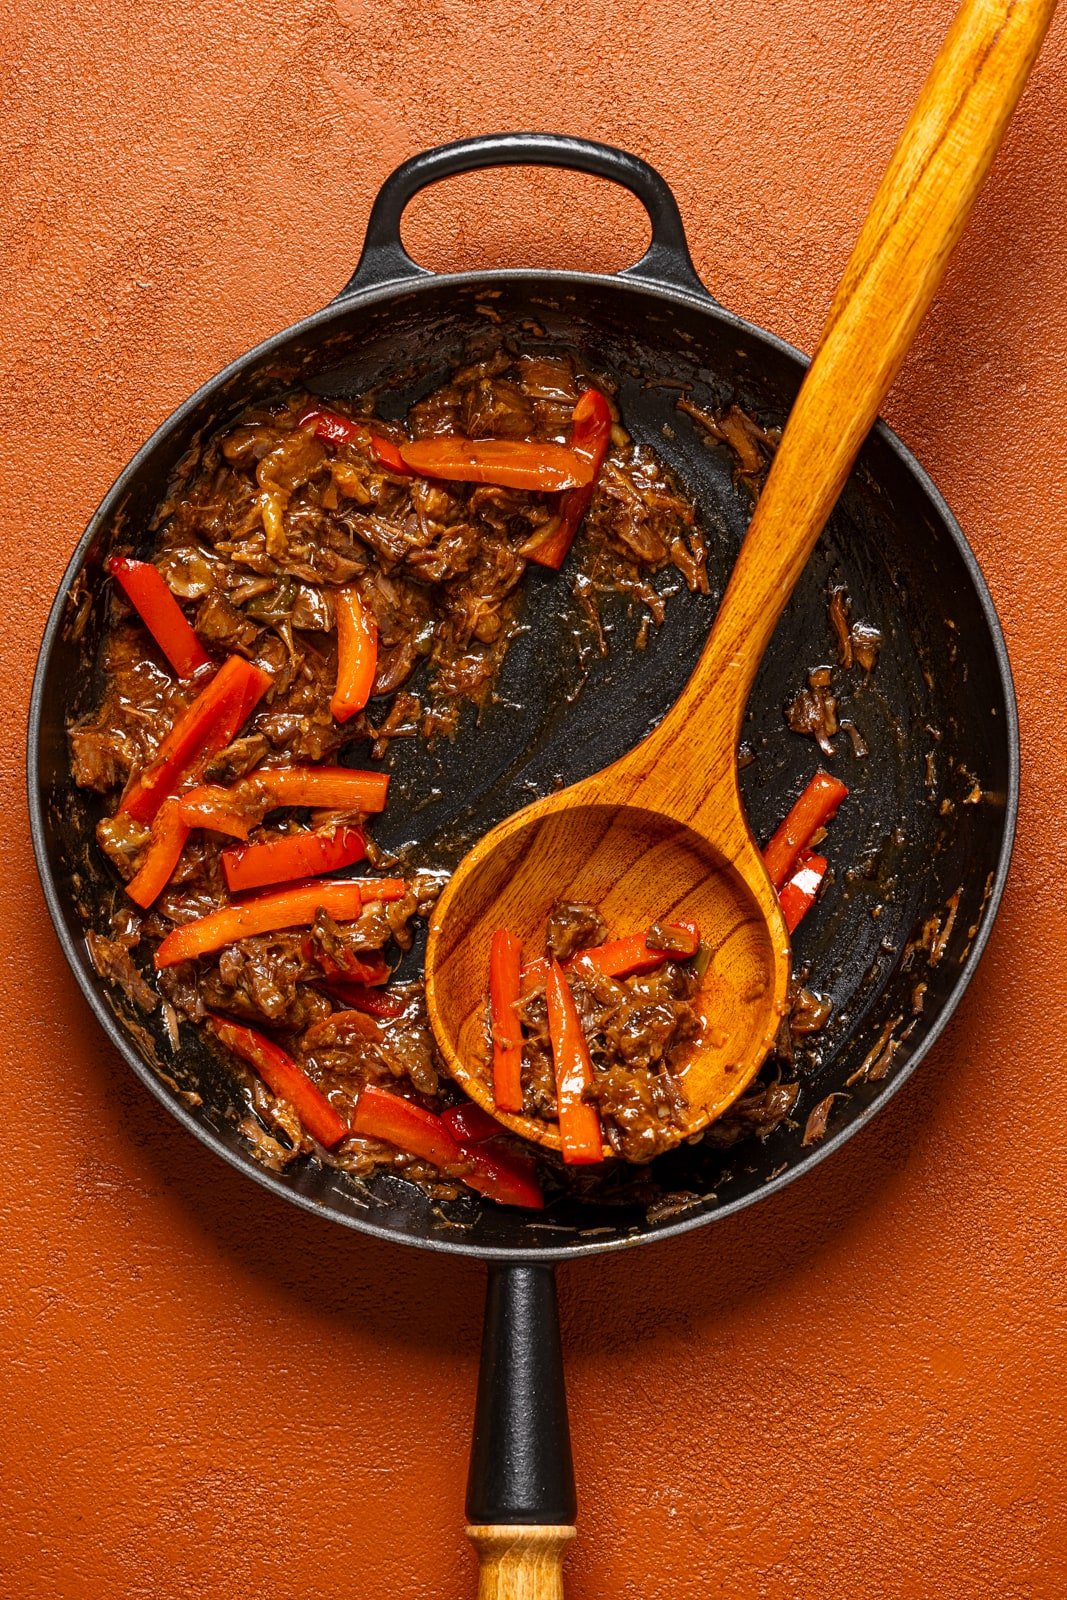 Sautéed oxtail and peppers in a black skillet with a wooden spoon.